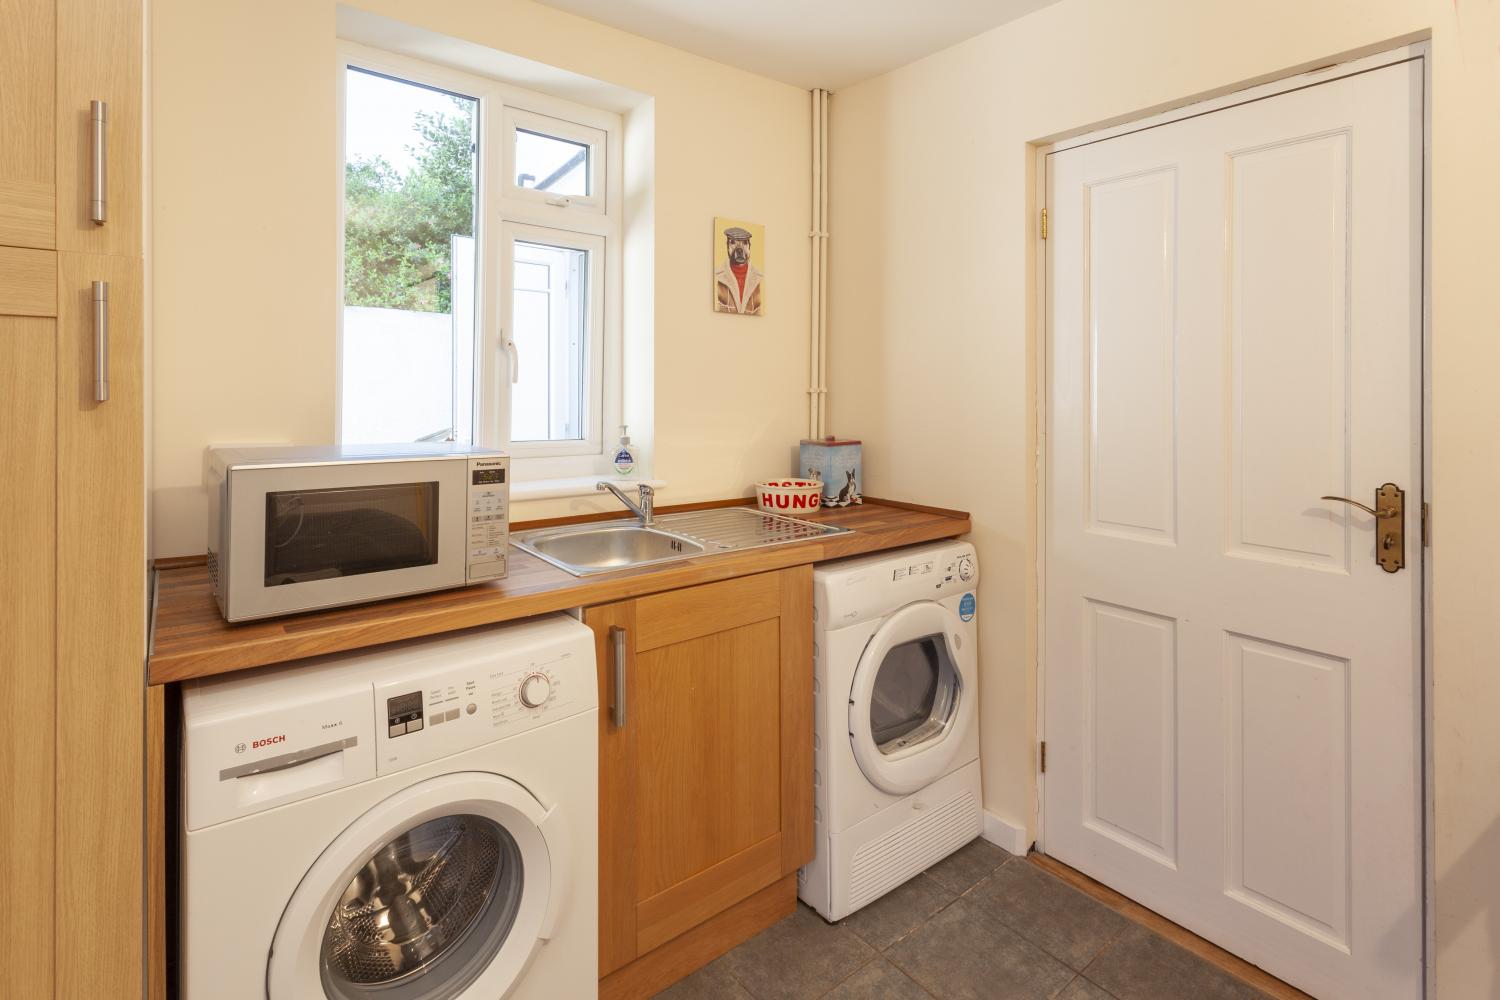 Large utility room with washing machine, tumble dryer, sink, microwave and separate cloakroom with toilet and basin.